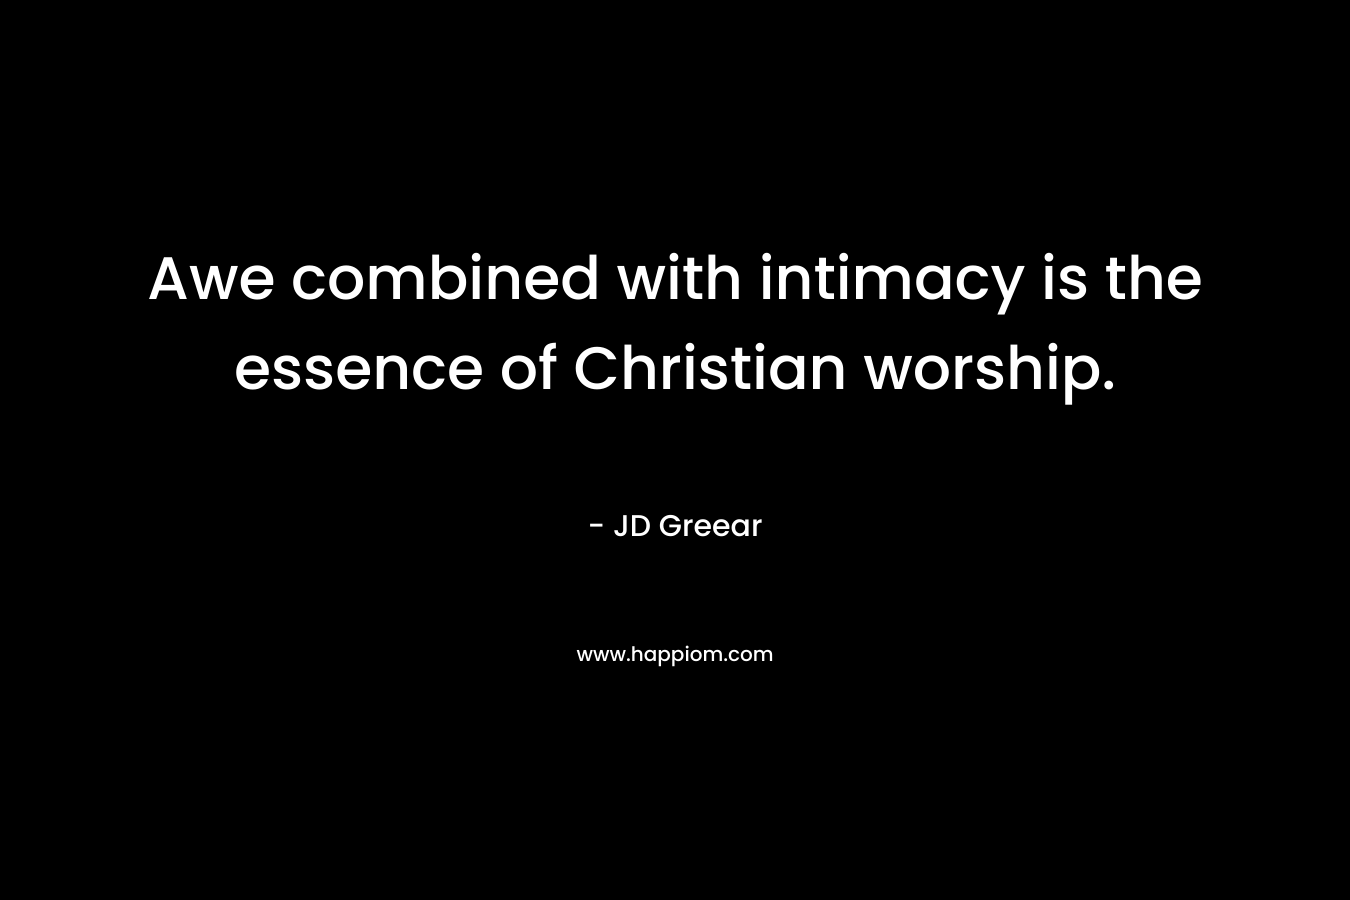 Awe combined with intimacy is the essence of Christian worship. – JD Greear